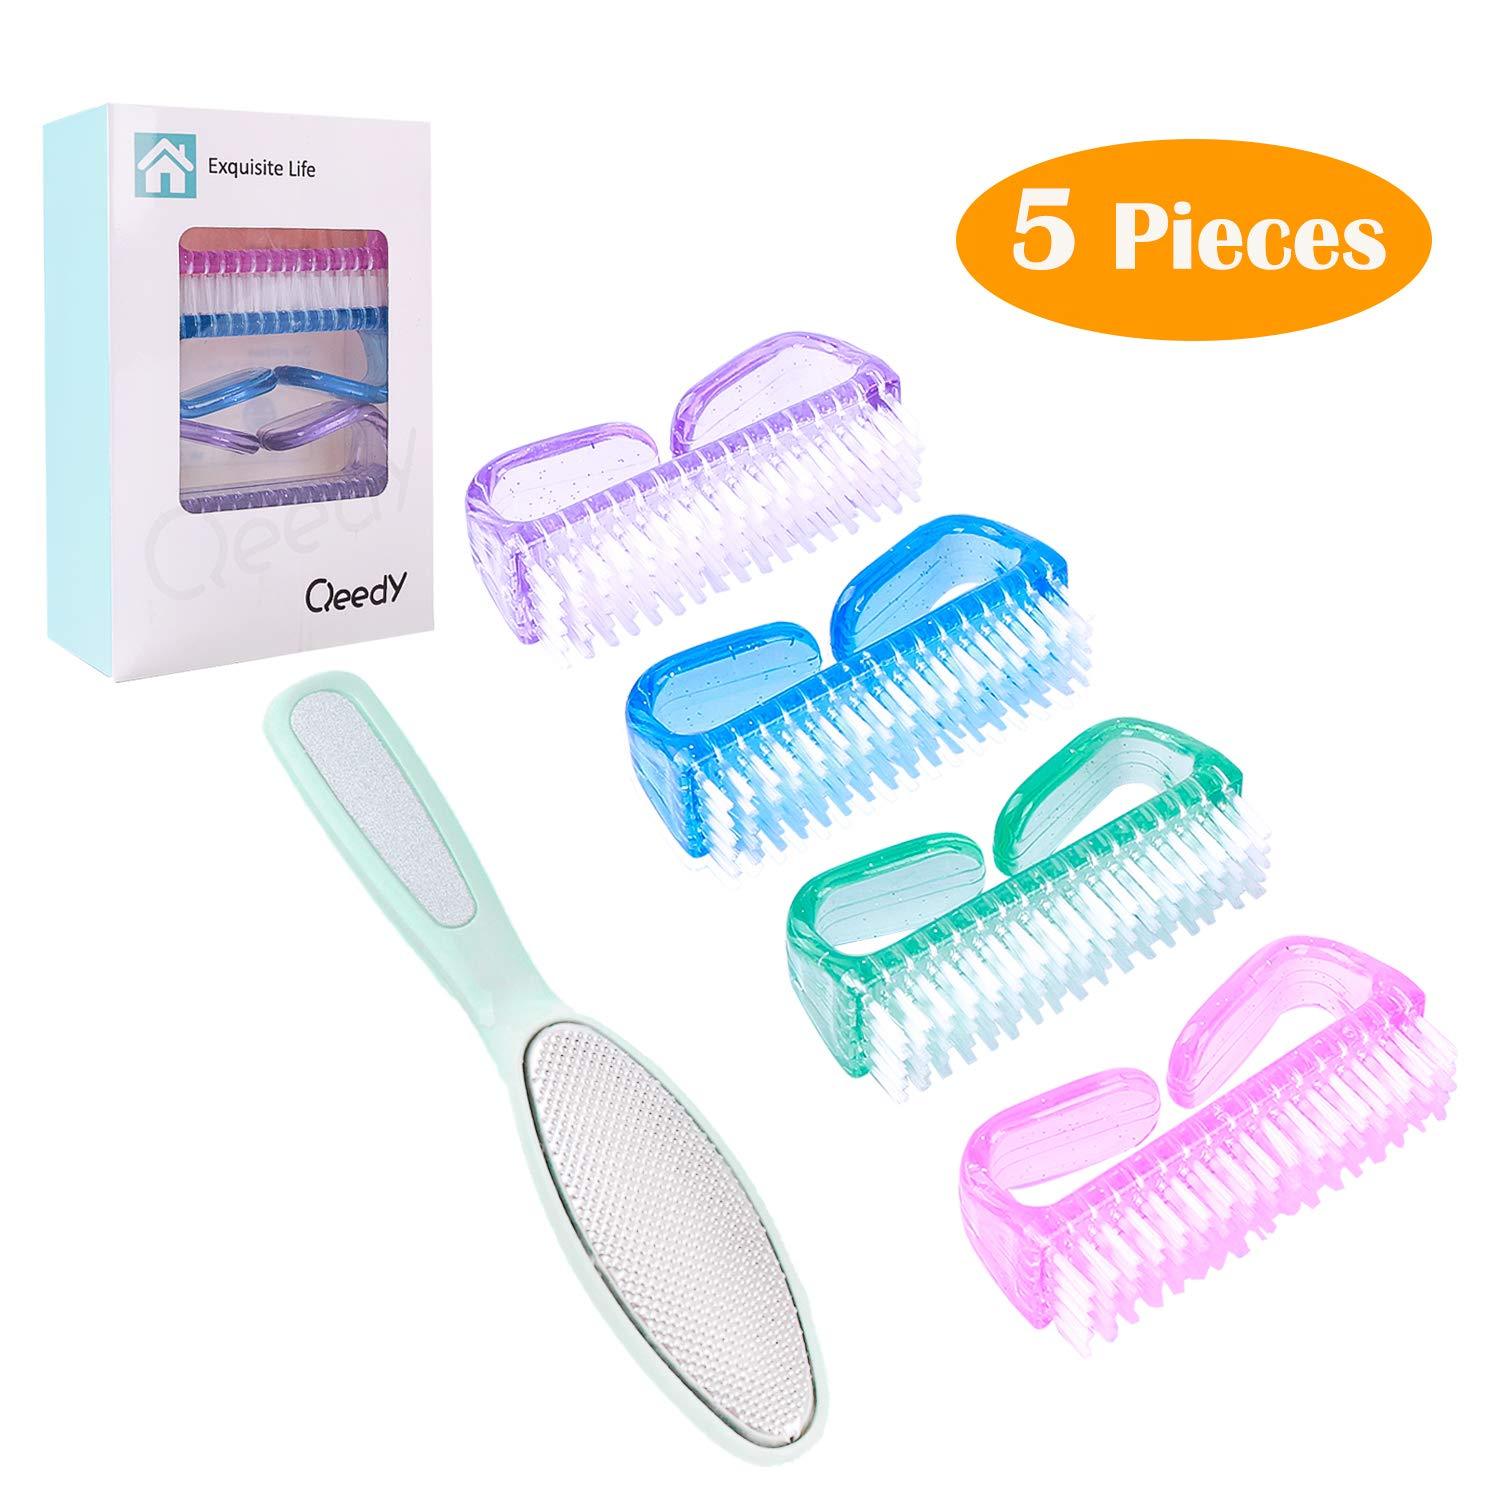 Handle Nail Brush Fingernail Brush Cleaner Hand Scrub Cleaning Brush for Toes，Stainless Steel Foot File Pedicure Metal Surface Tool To Remove Hard Skin Four Color - image 1 of 7